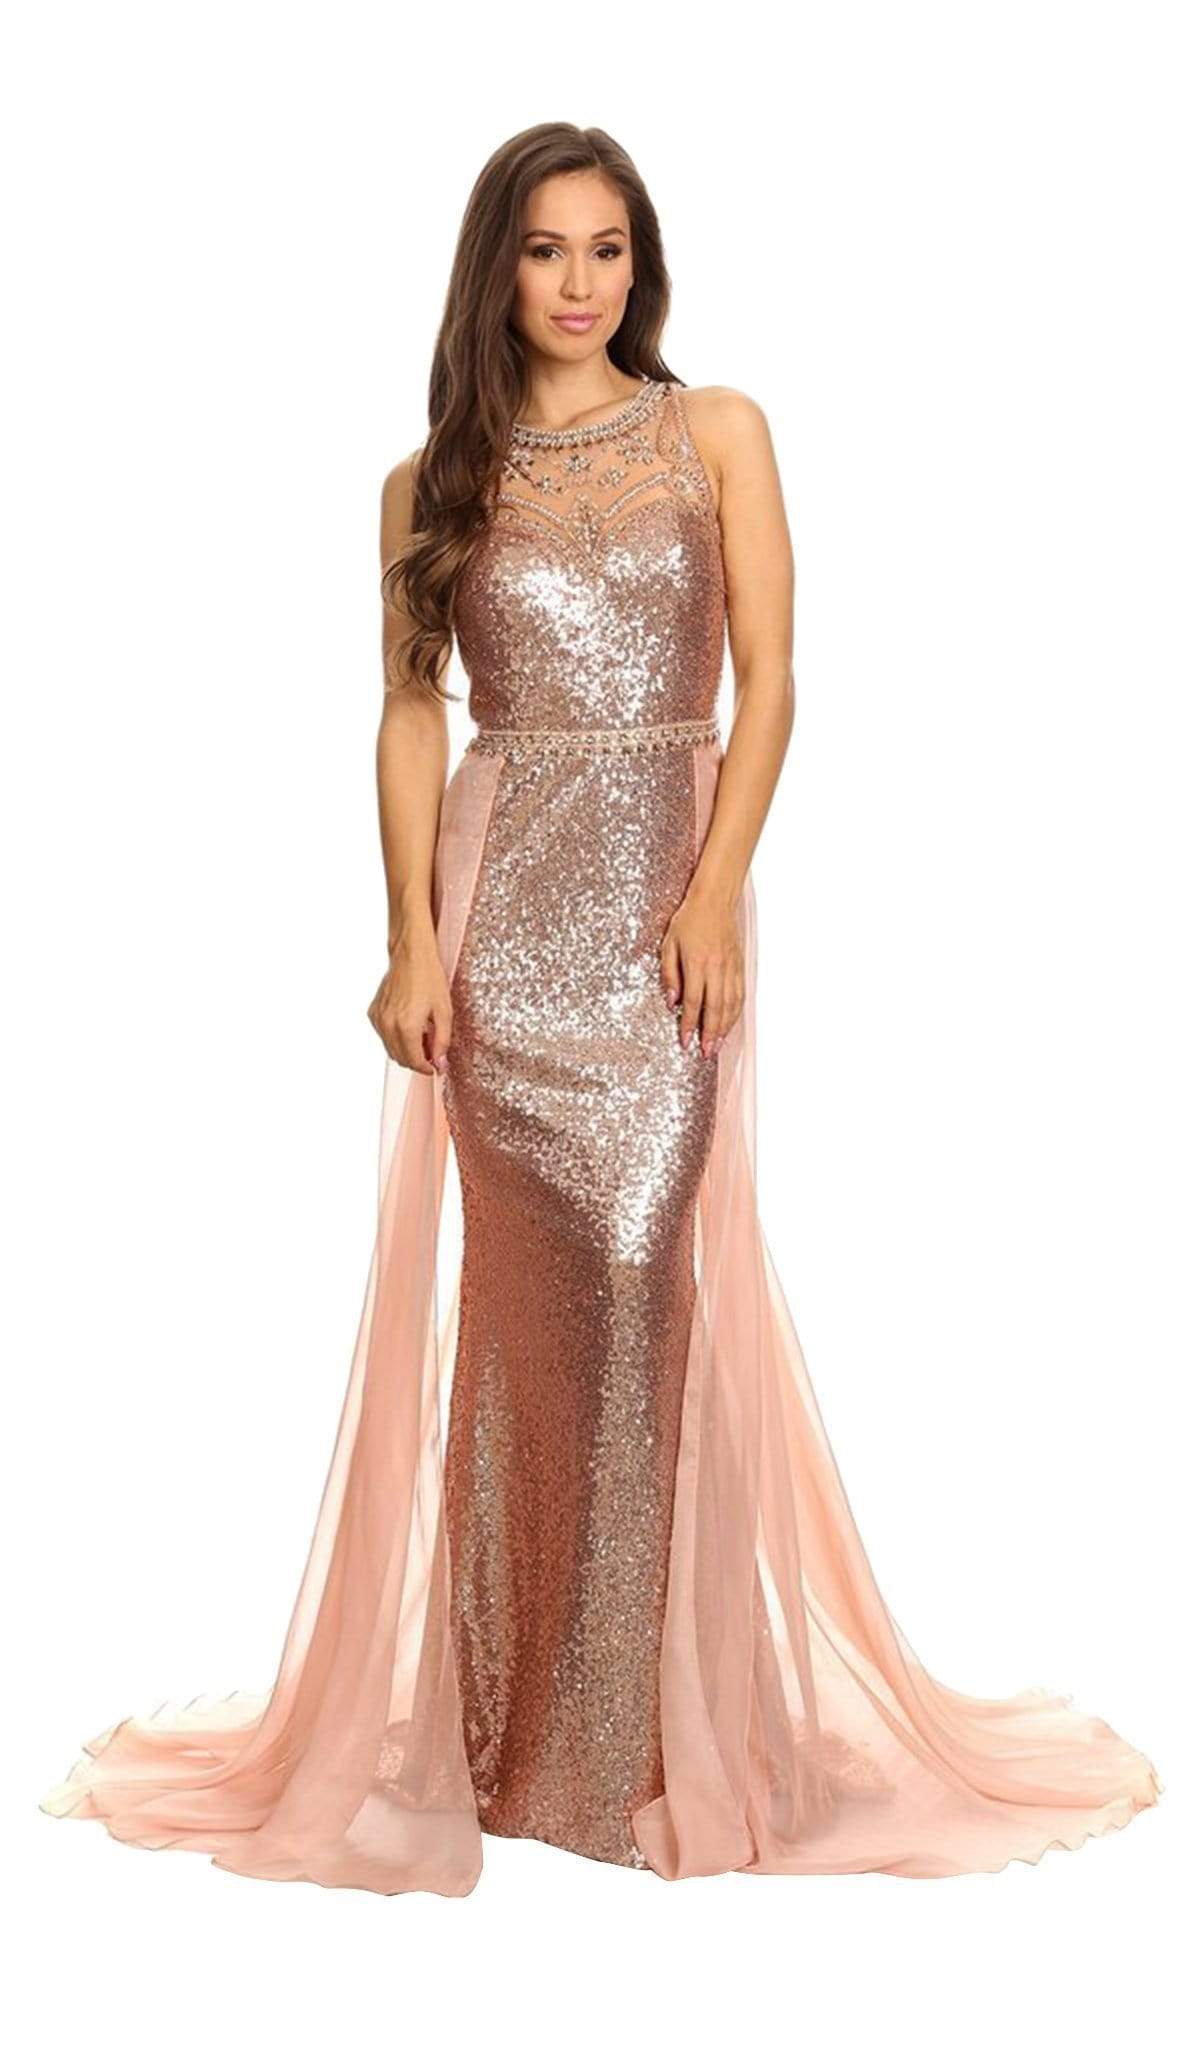 Image of Eureka Fashion - Sequined Illusion Halter Evening Dress With Sheer Overlay